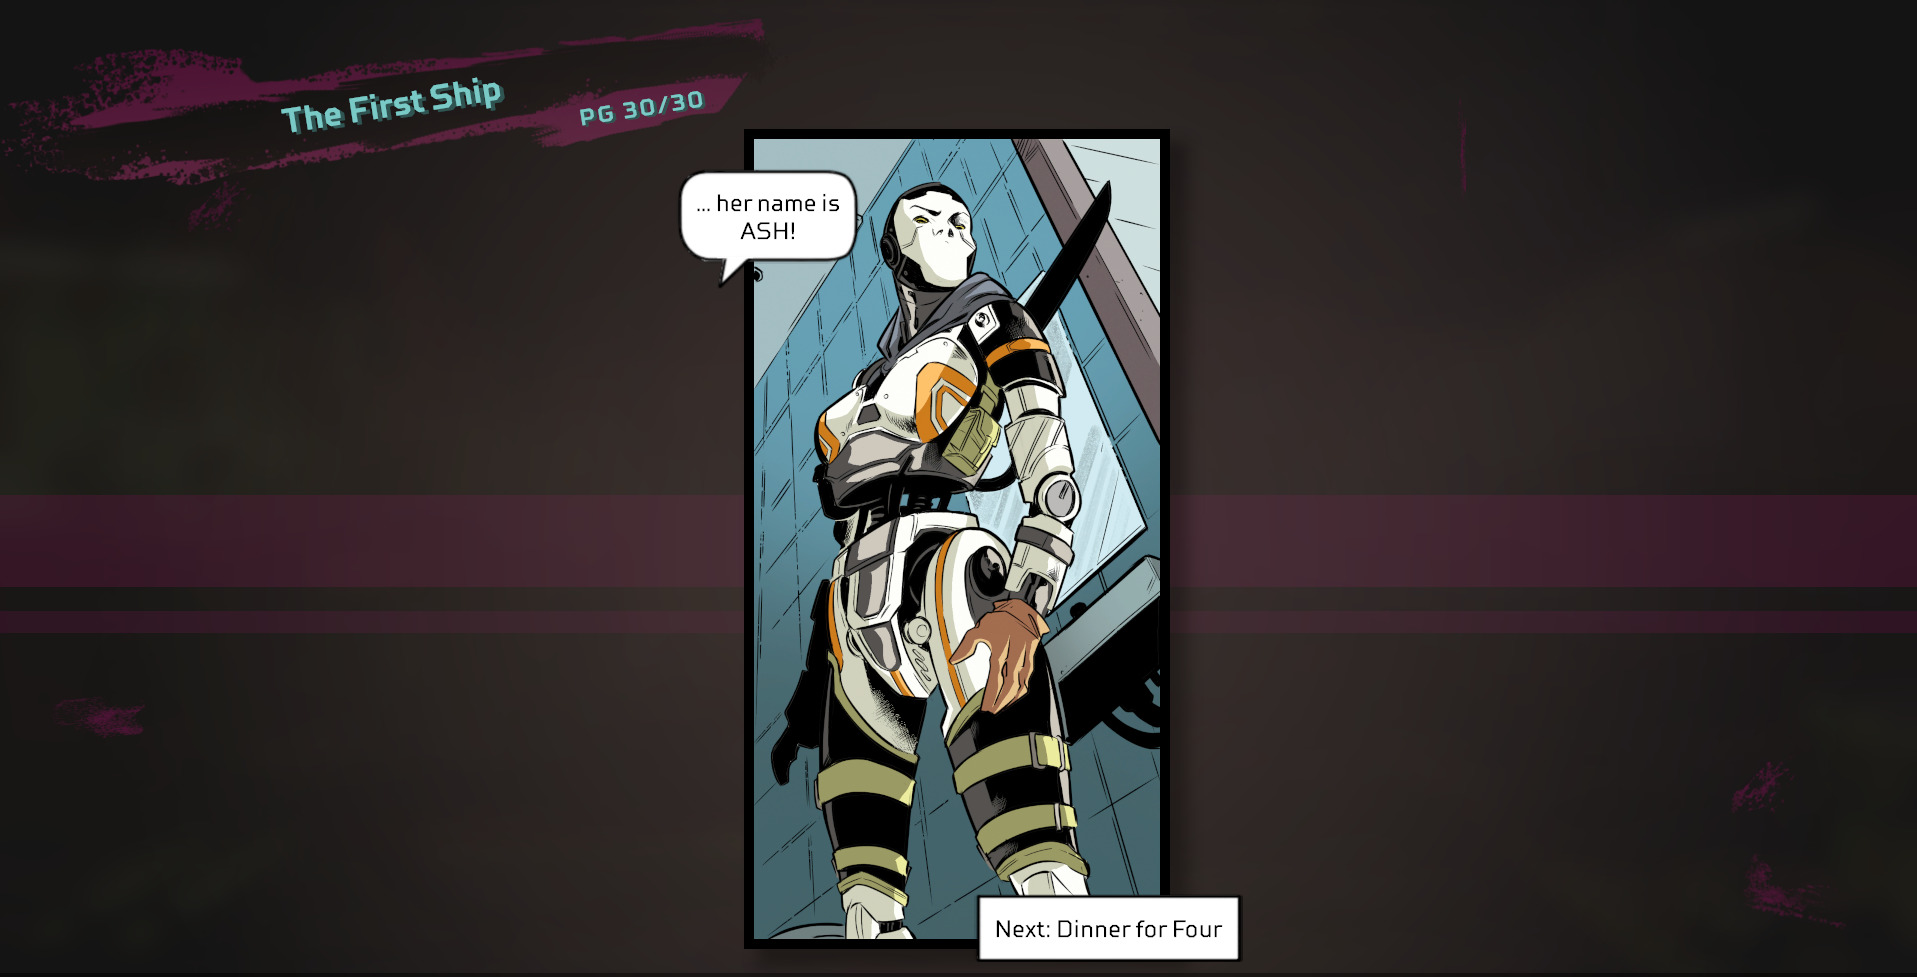 Apex Legends' third comic page reveals Ash is awake and living with Pa...